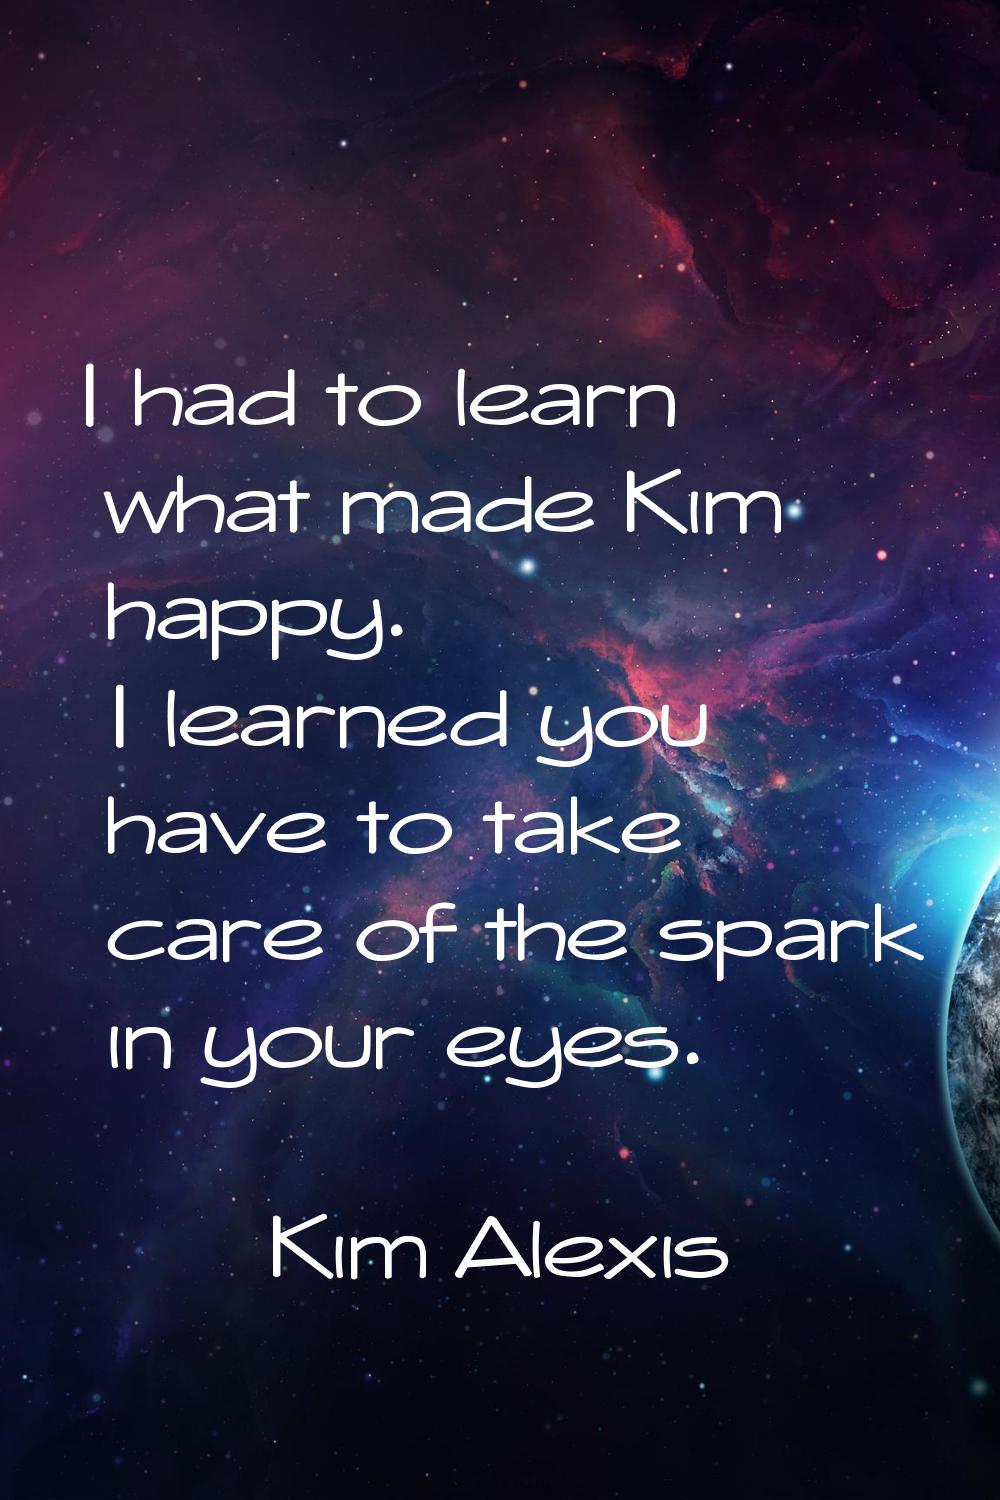 I had to learn what made Kim happy. I learned you have to take care of the spark in your eyes.